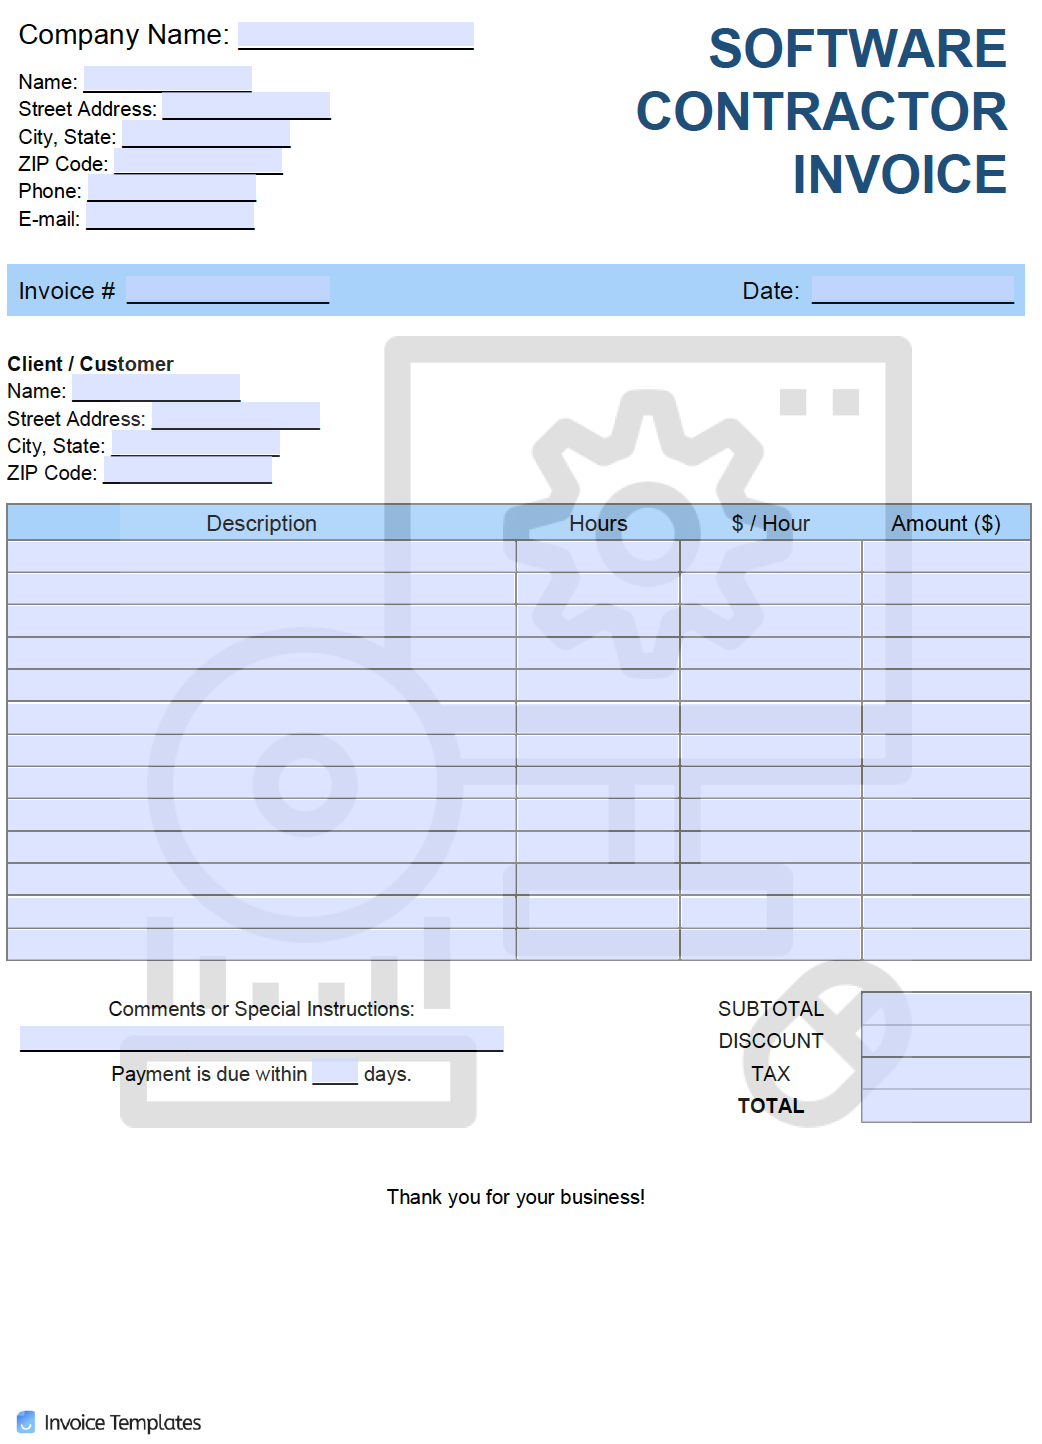 Free Software Contractor Invoice Template  PDF  WORD  EXCEL Inside Contractor Invoices Templates